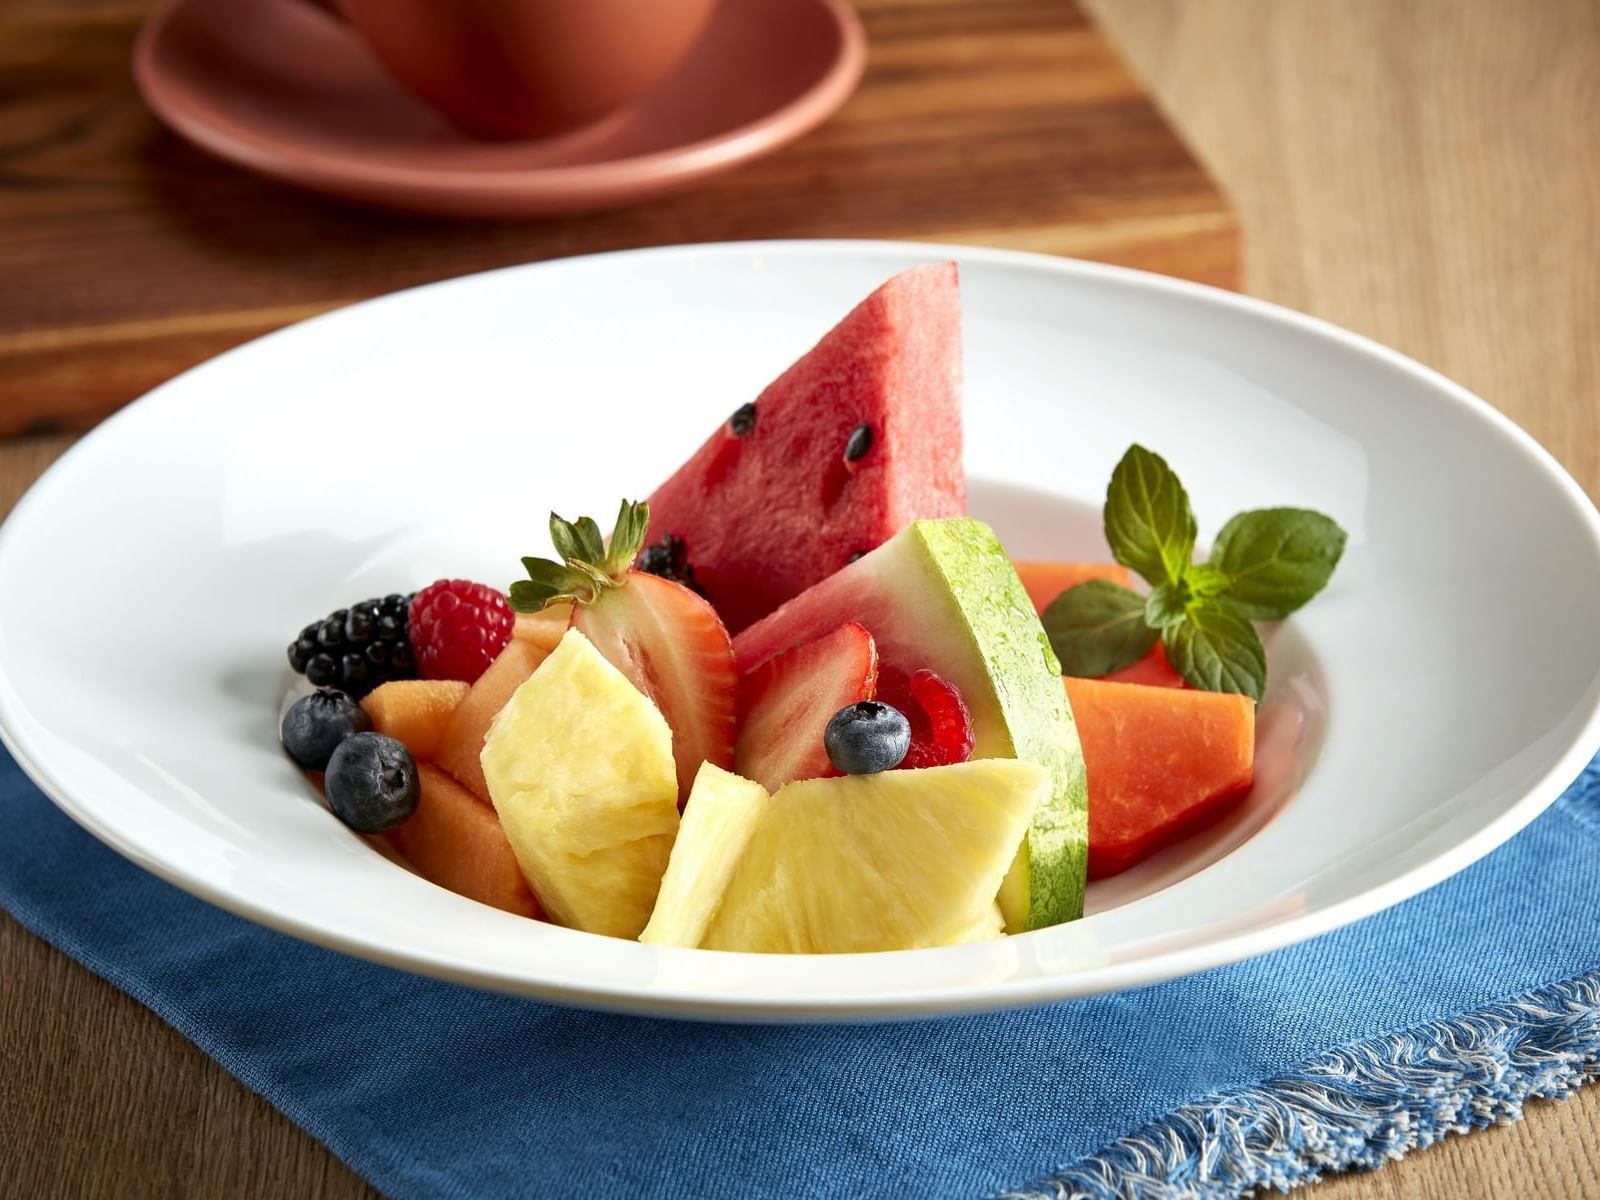 Watermelon, strawberries, pineapple & a variety of berries served for breakfast at Gamma Hotels